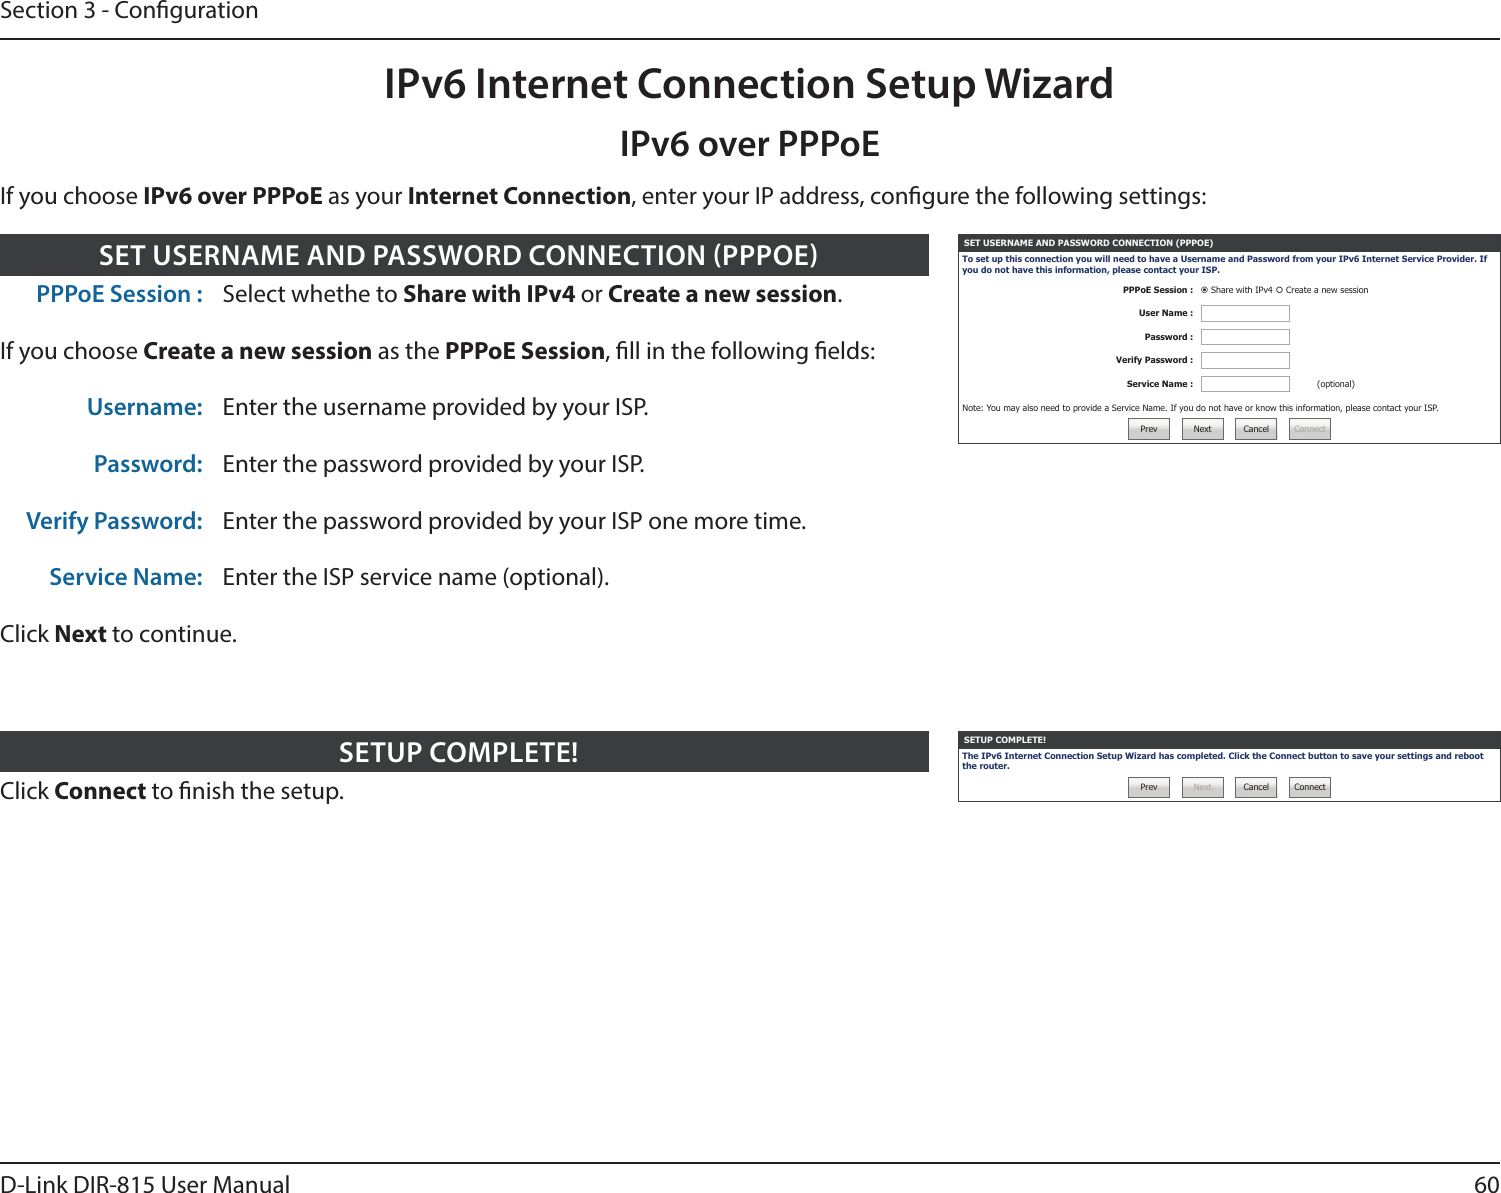 60D-Link DIR-815 User ManualSection 3 - CongurationIf you choose IPv6 over PPPoE as your Internet Connection, enter your IP address, congure the following settings:IPv6 over PPPoEIPv6 Internet Connection Setup WizardClick Connect to nish the setup.SETUP COMPLETE! SETUP COMPLETE!The IPv6 Internet Connection Setup Wizard has completed. Click the Connect button to save your settings and reboot the router.Prev Next Cancel ConnectPPPoE Session : Select whethe to Share with IPv4 or Create a new session.If you choose Create a new session as the PPPoE Session, ll in the following elds:Username: Enter the username provided by your ISP.Password: Enter the password provided by your ISP.Verify Password: Enter the password provided by your ISP one more time.Service Name: Enter the ISP service name (optional).Click Next to continue.SET USERNAME AND PASSWORD CONNECTION PPPOE SET USERNAME AND PASSWORD CONNECTION (PPPOE)To set up this connection you will need to have a Username and Password from your IPv6 Internet Service Provider. If you do not have this information, please contact your ISP.PPPoE Session :  Share with IPv4  Create a new sessionUser Name :Password :Verify Password :Service Name : (optional)Note: You may also need to provide a Service Name. If you do not have or know this information, please contact your ISP.Prev Next Cancel Connect